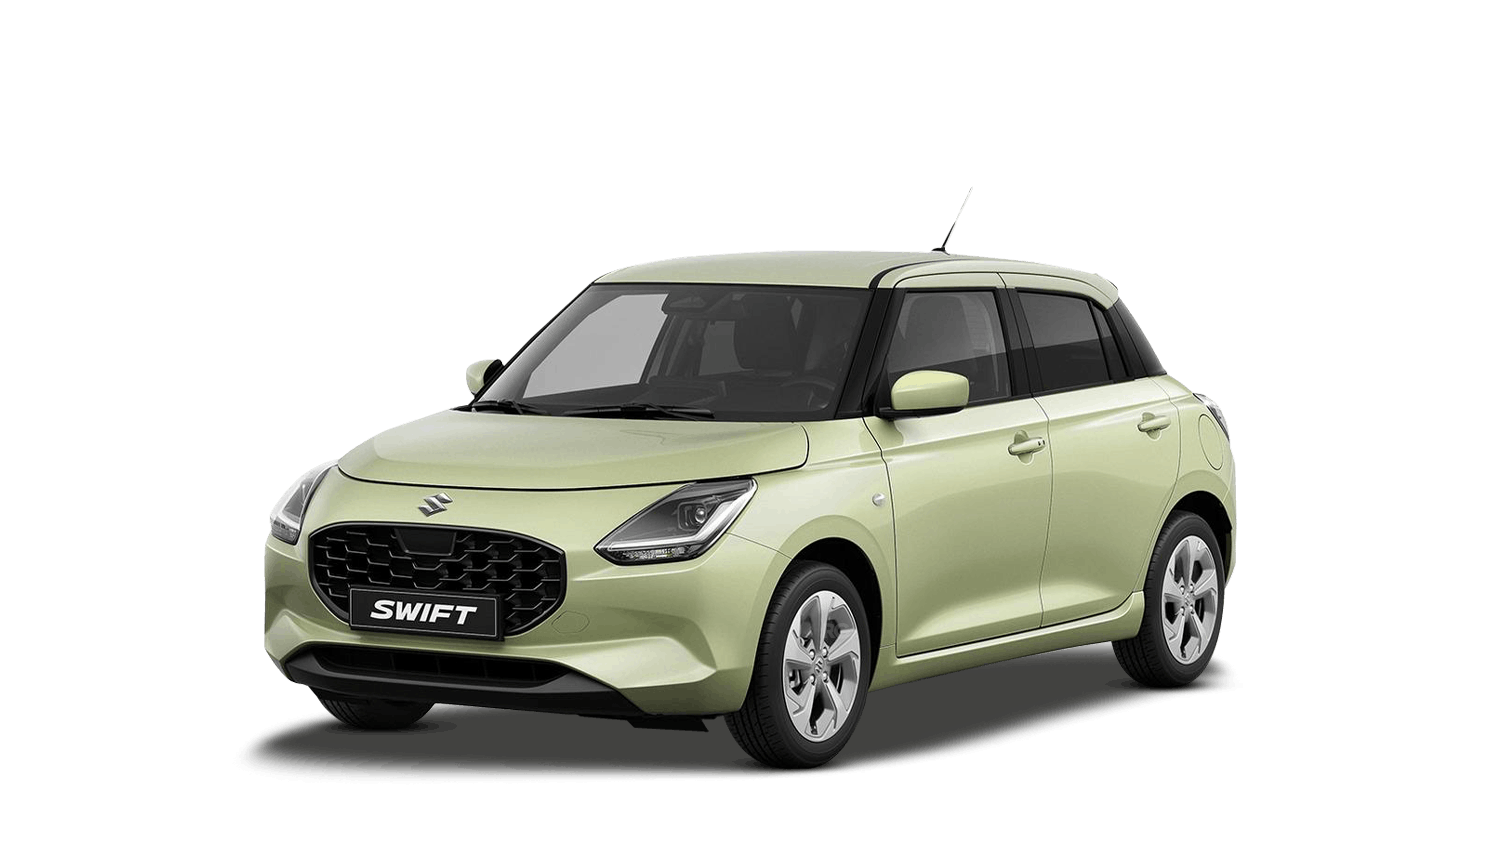 Suzuki New Swift Personal Contract Hire Offers